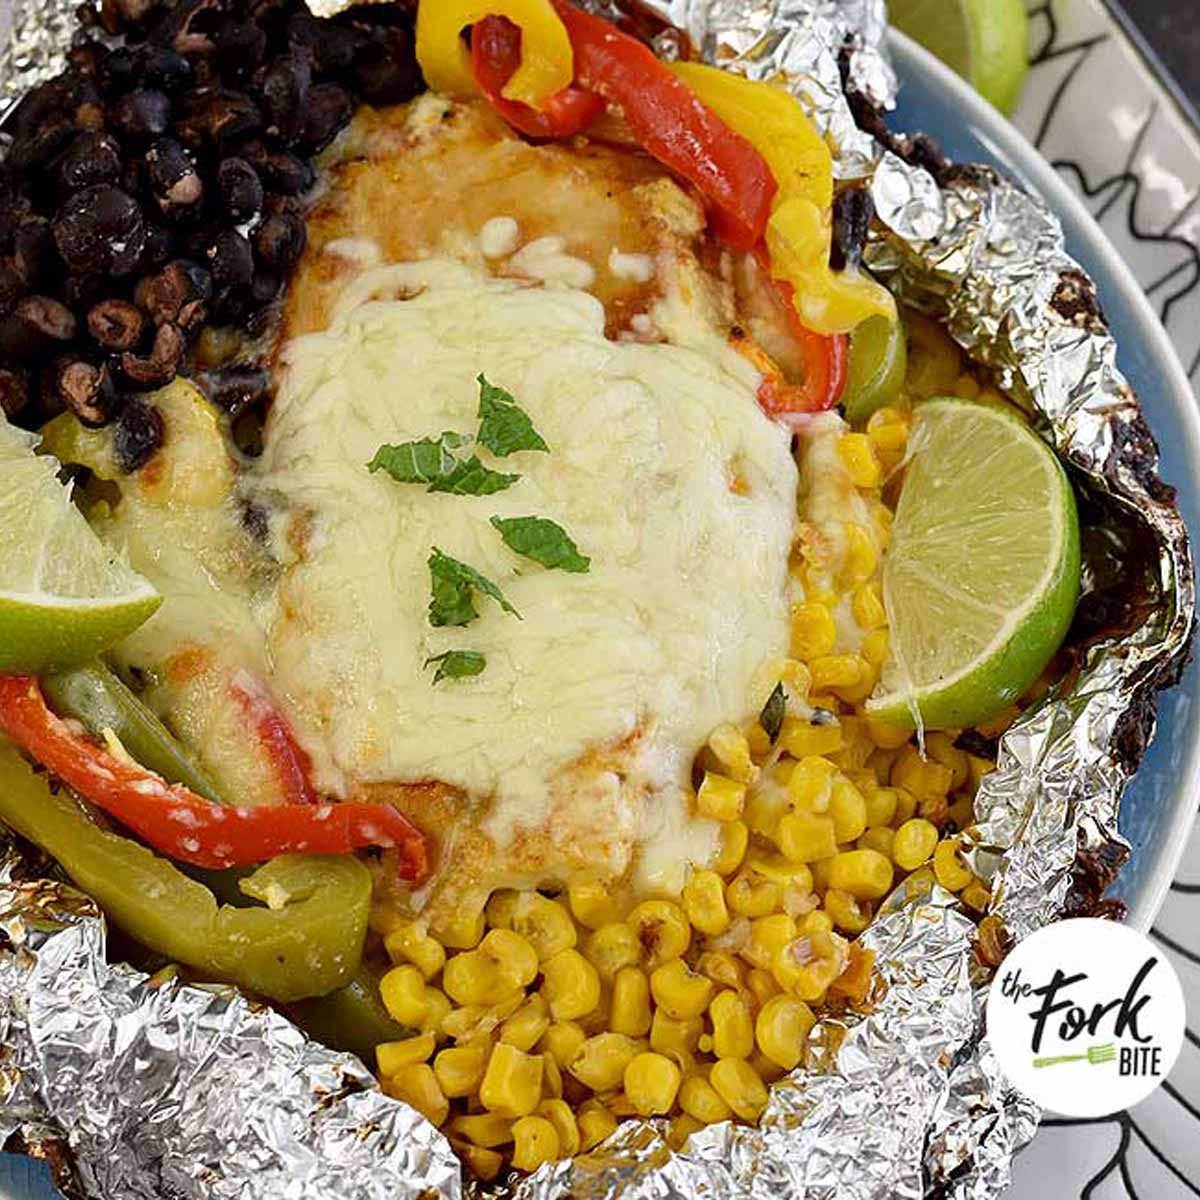 Today’s crazy-busy moms rock it with foil packet meals! Foil packet food is versatile, nutritious and quick to prepare.